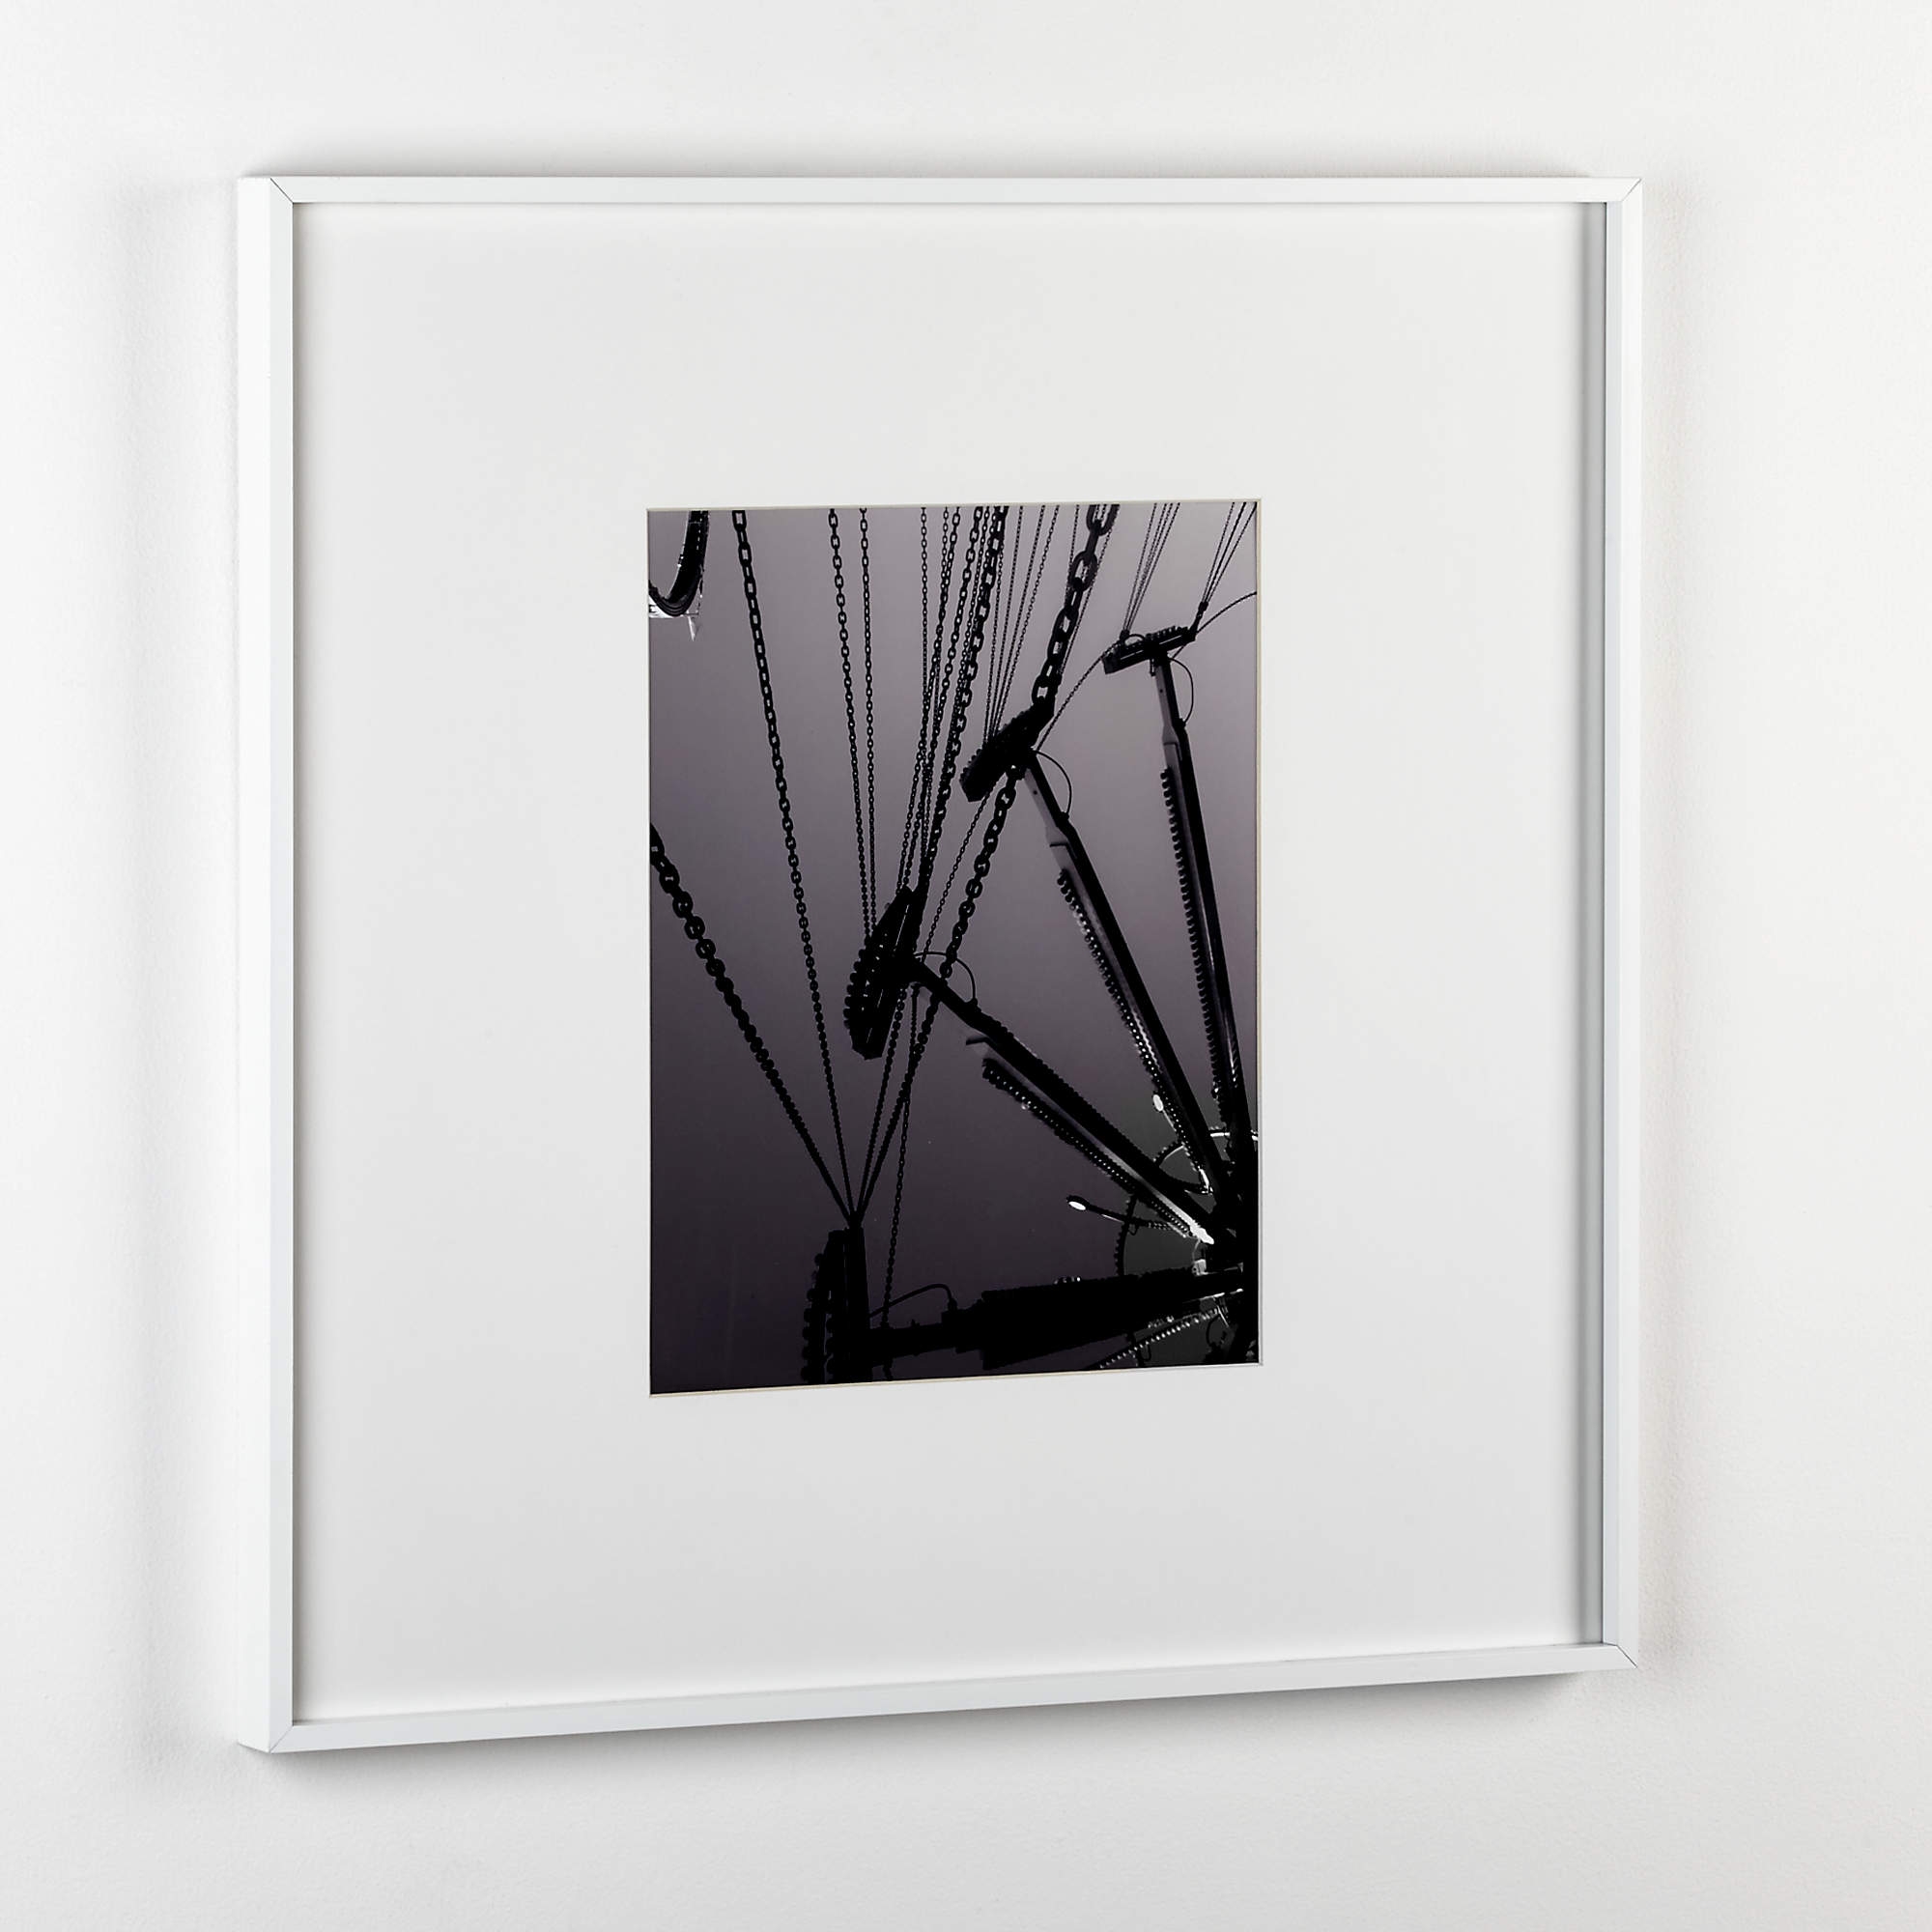 Gallery Picture Frame, White, 11" x 14" - Image 1